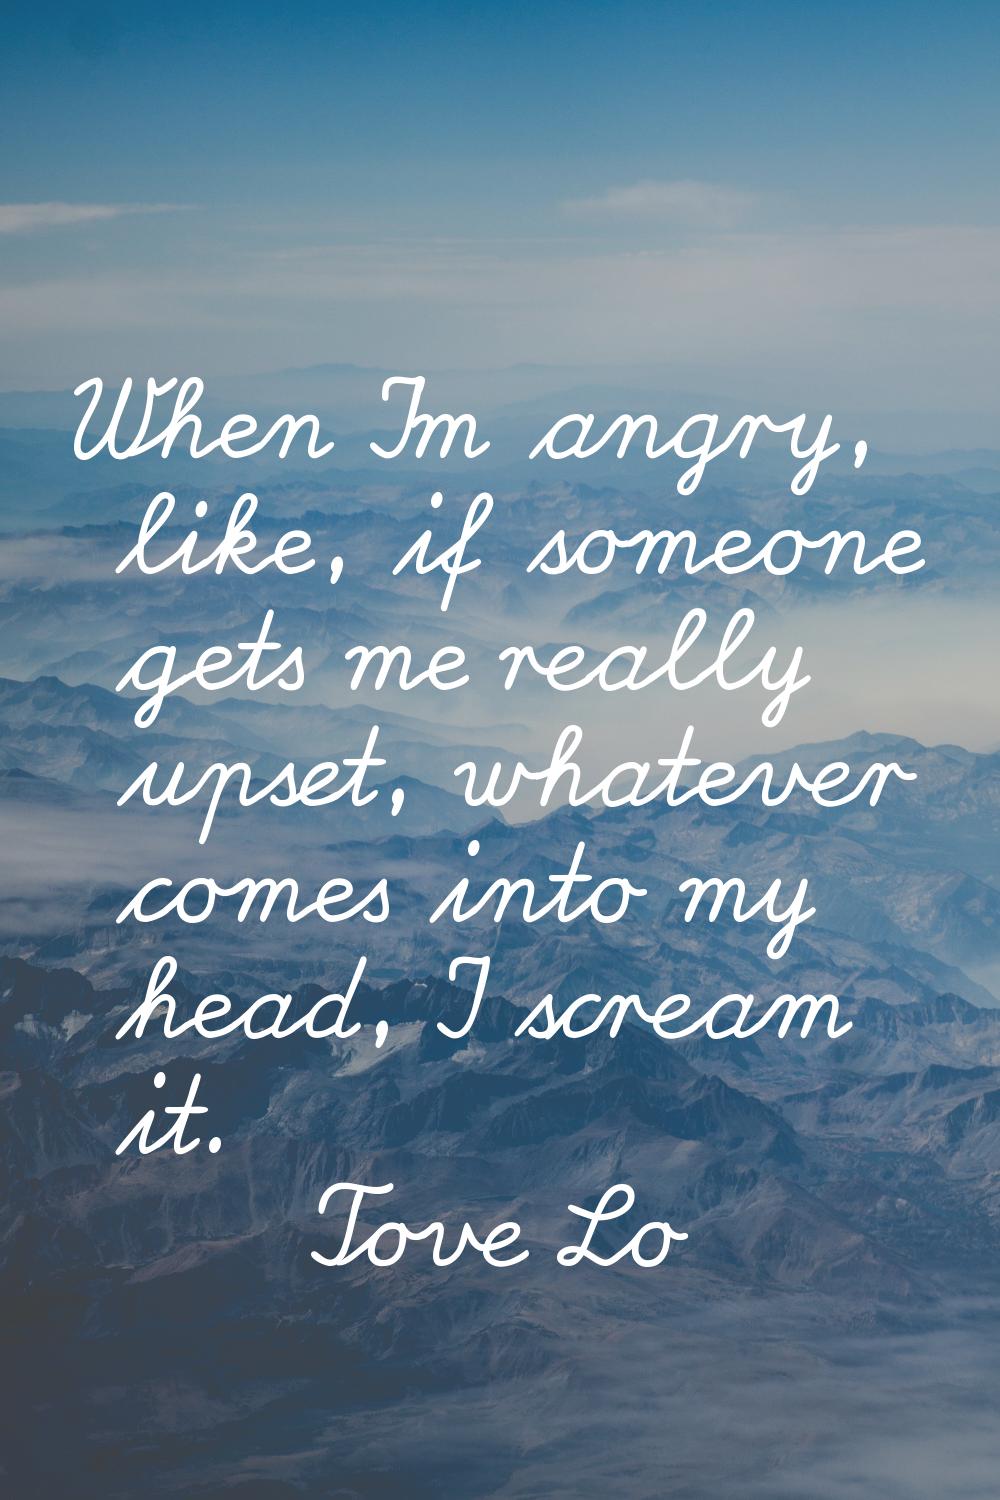 When I'm angry, like, if someone gets me really upset, whatever comes into my head, I scream it.